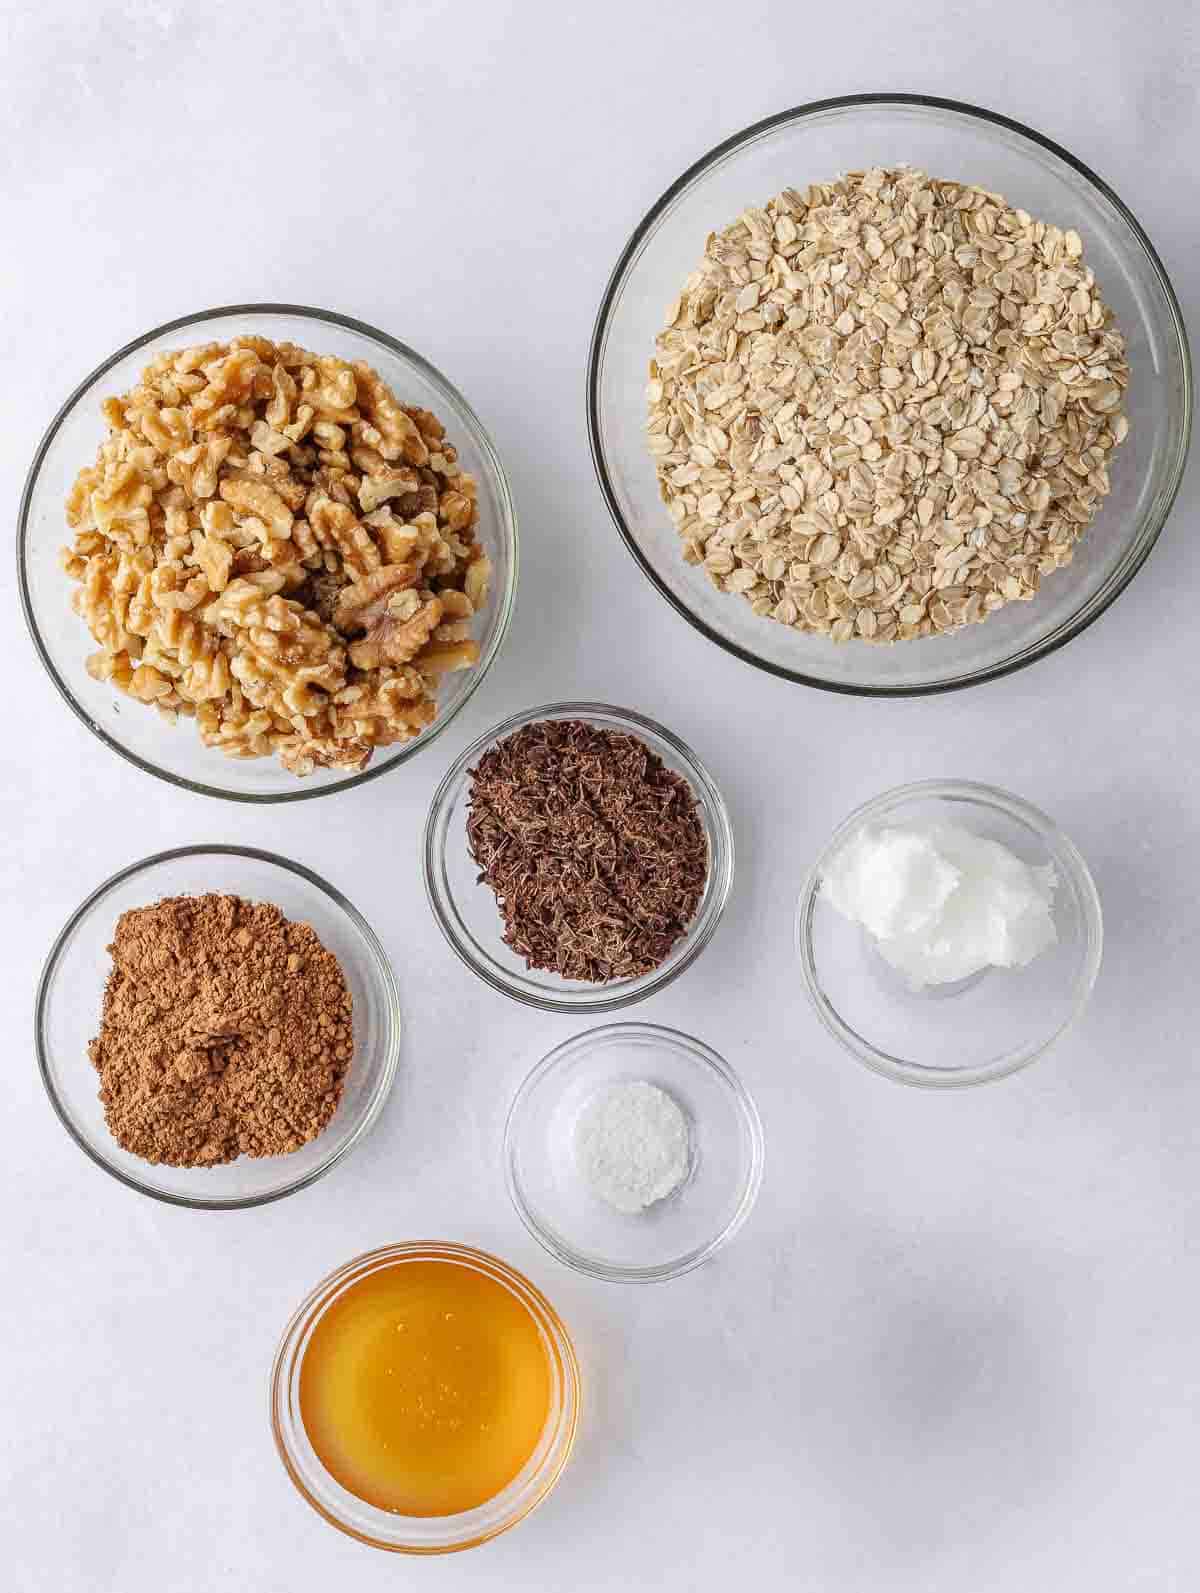 Ingredients needed for homemade chocolate granola.